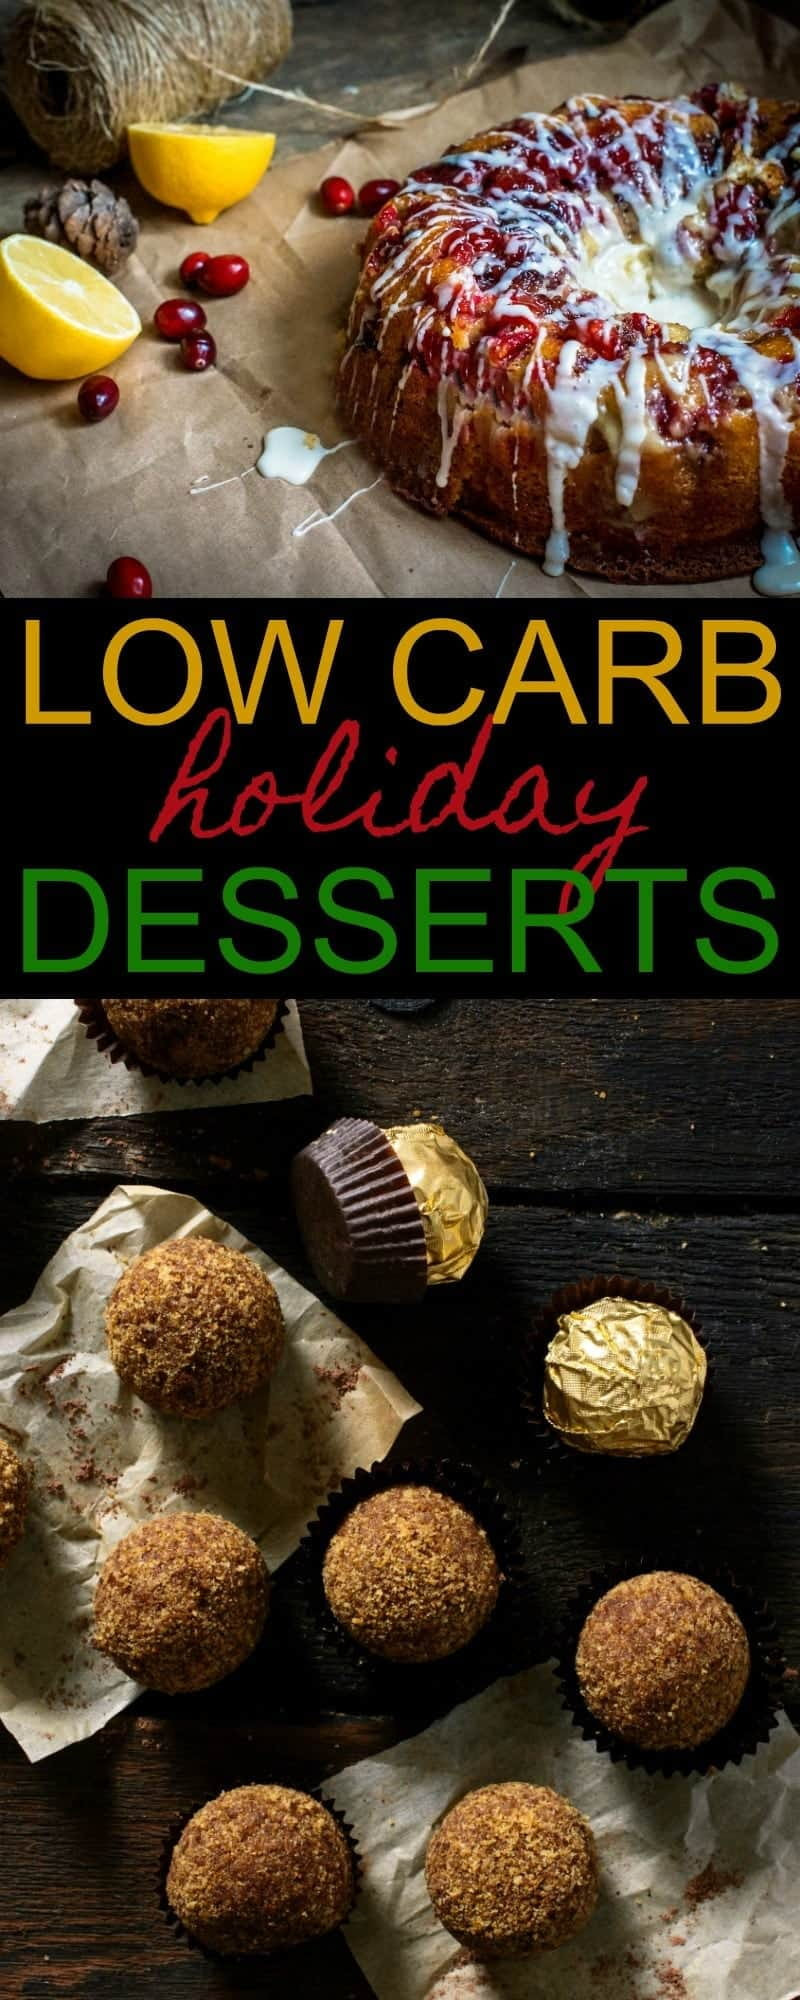 Low Carb Holiday Recipes
 Low Carb Holiday Desserts 15 Delicious Recipes 730